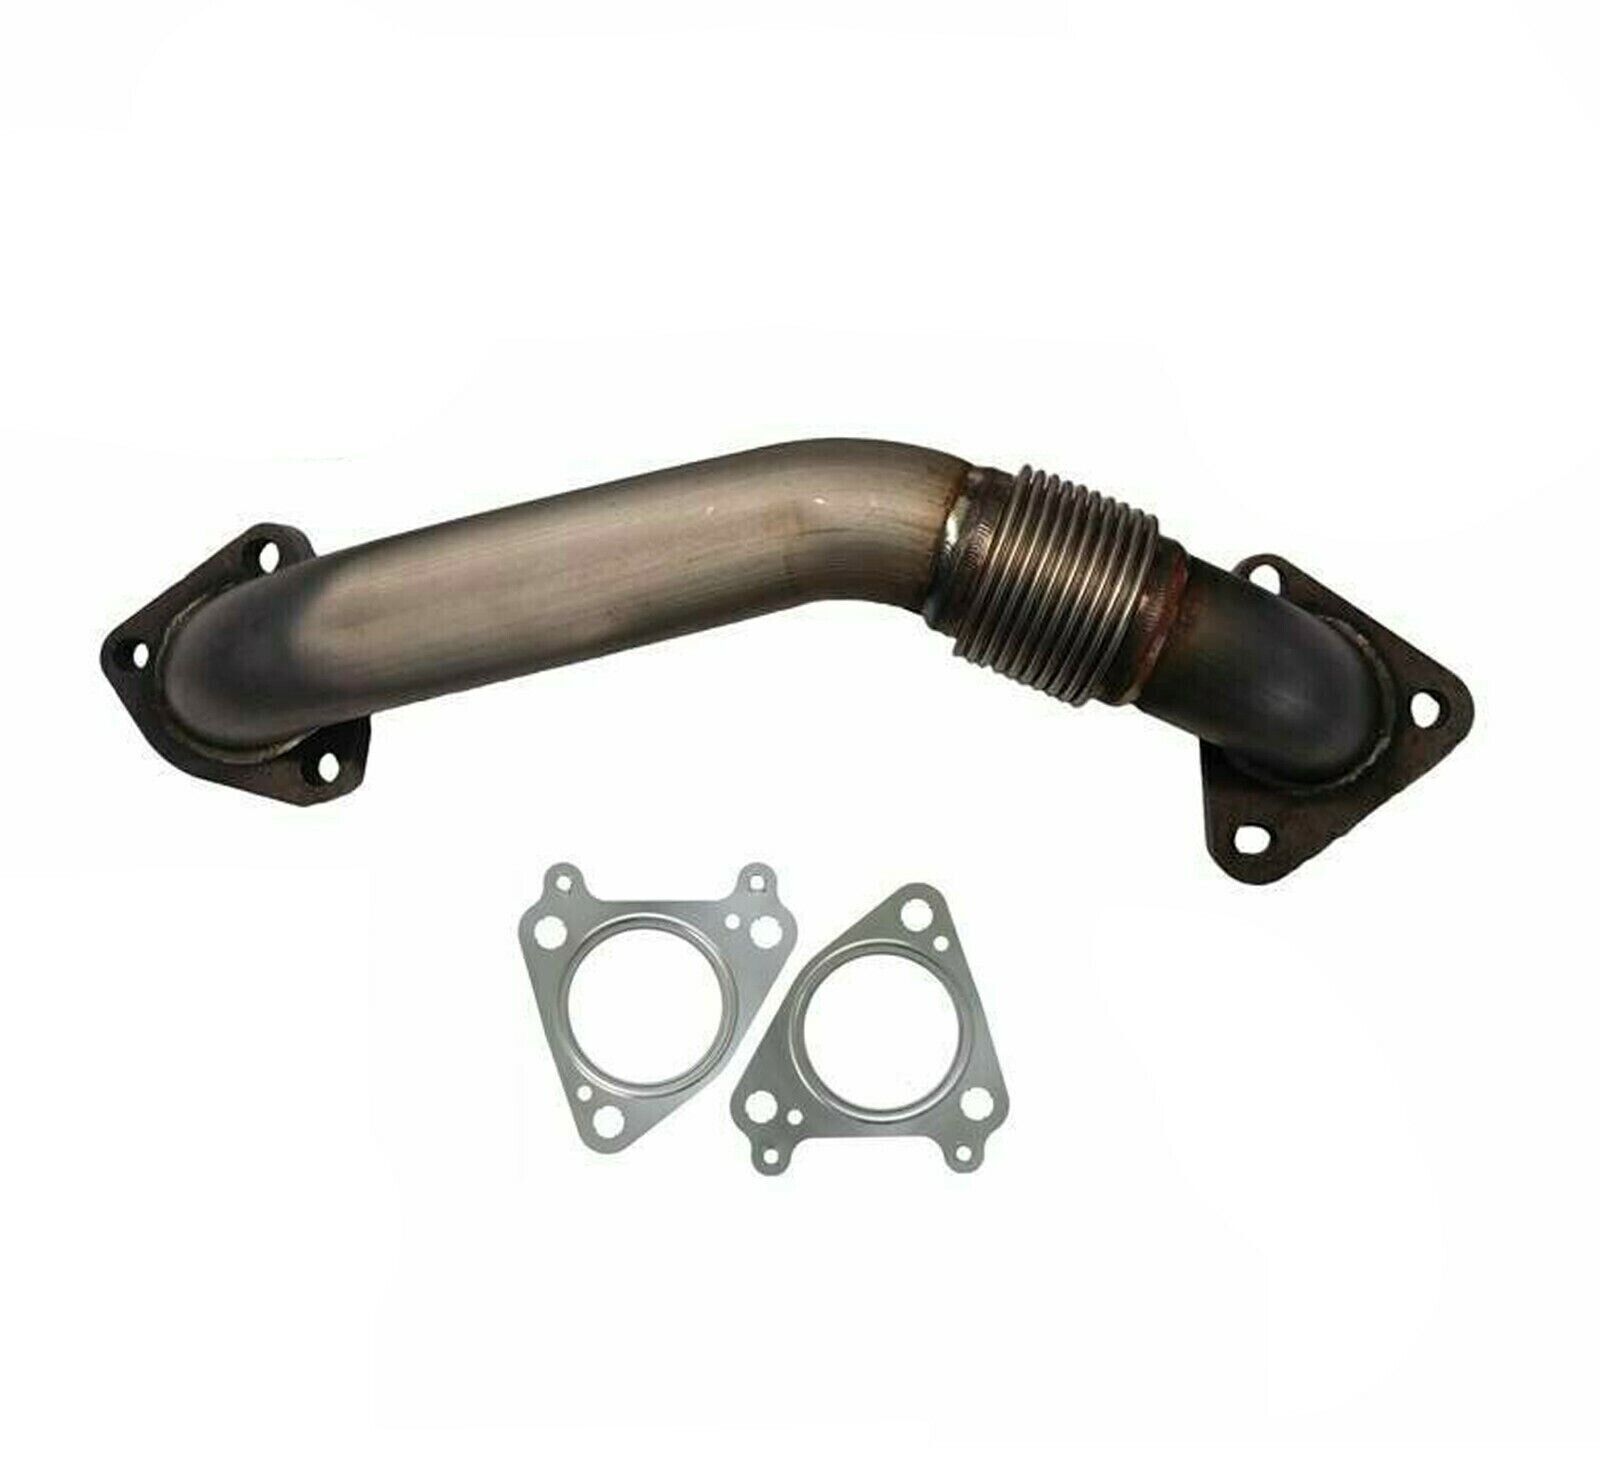 Rudy's Bolt-On Passenger Side Up-Pipe For 2001-2004 GM 2500/3500 6.6 LB7 Duramax